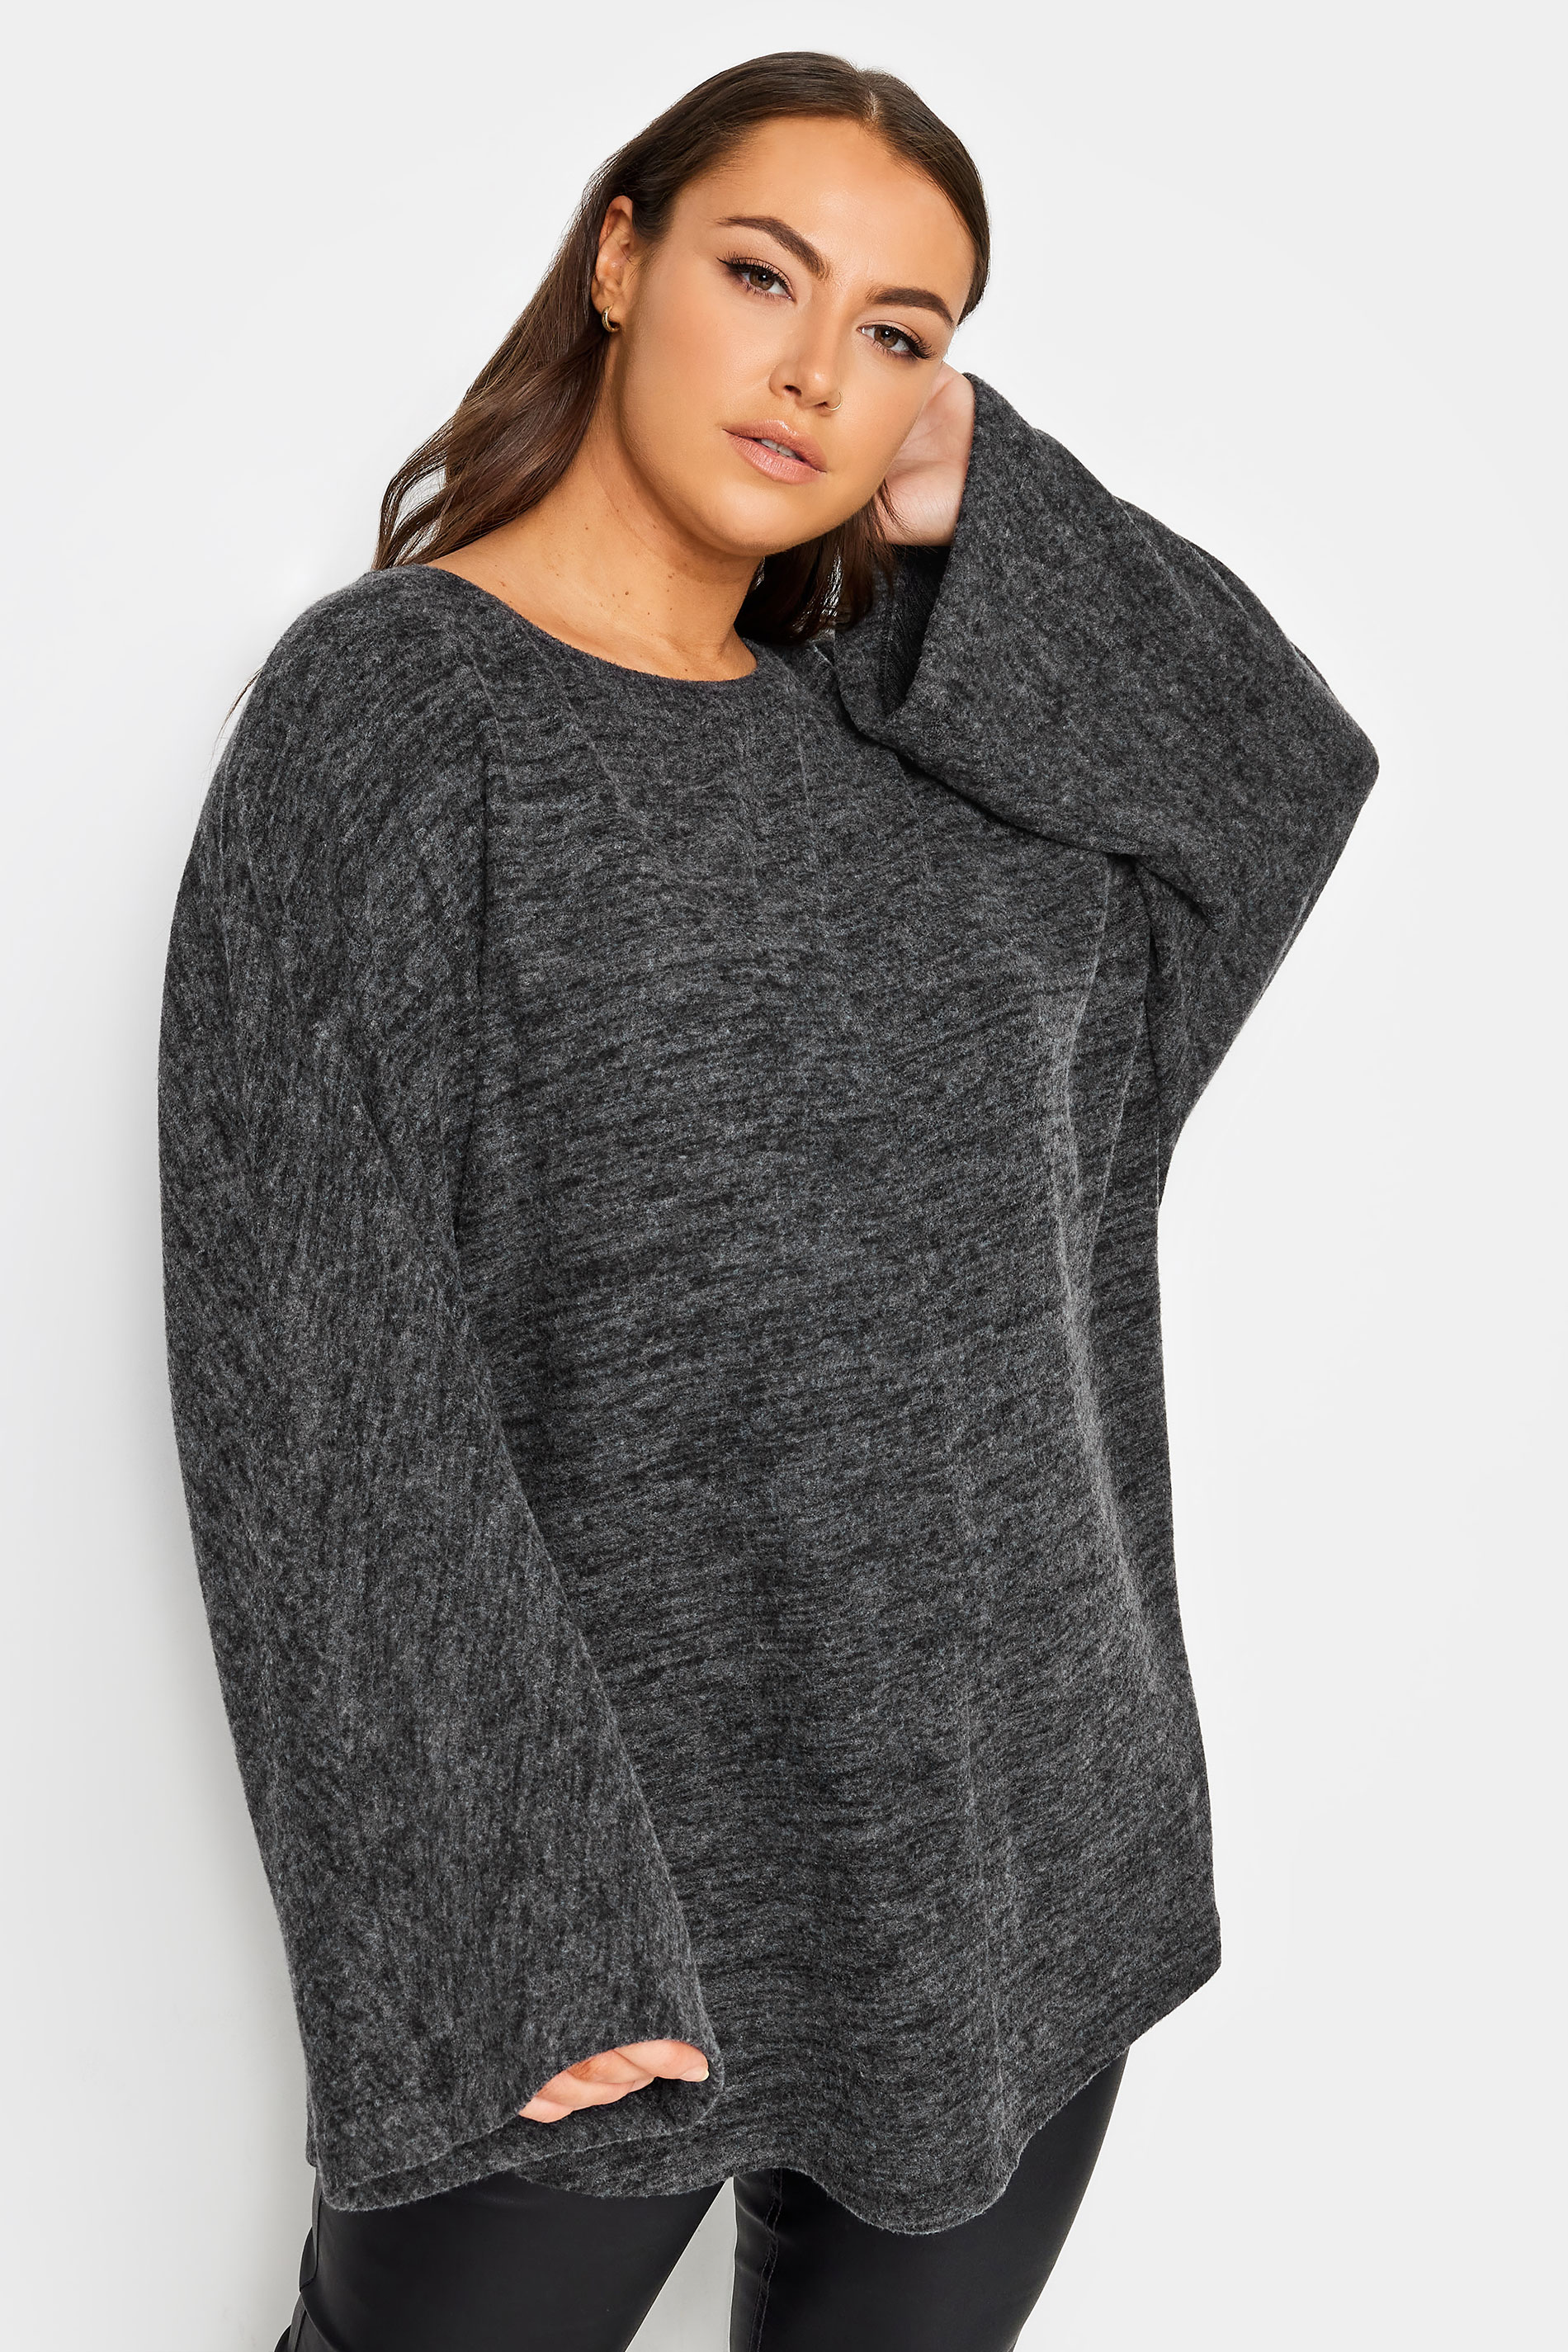 YOURS LUXURY Plus Size Charcoal Grey Batwing Sleeve Jumper | Yours Clothing 1